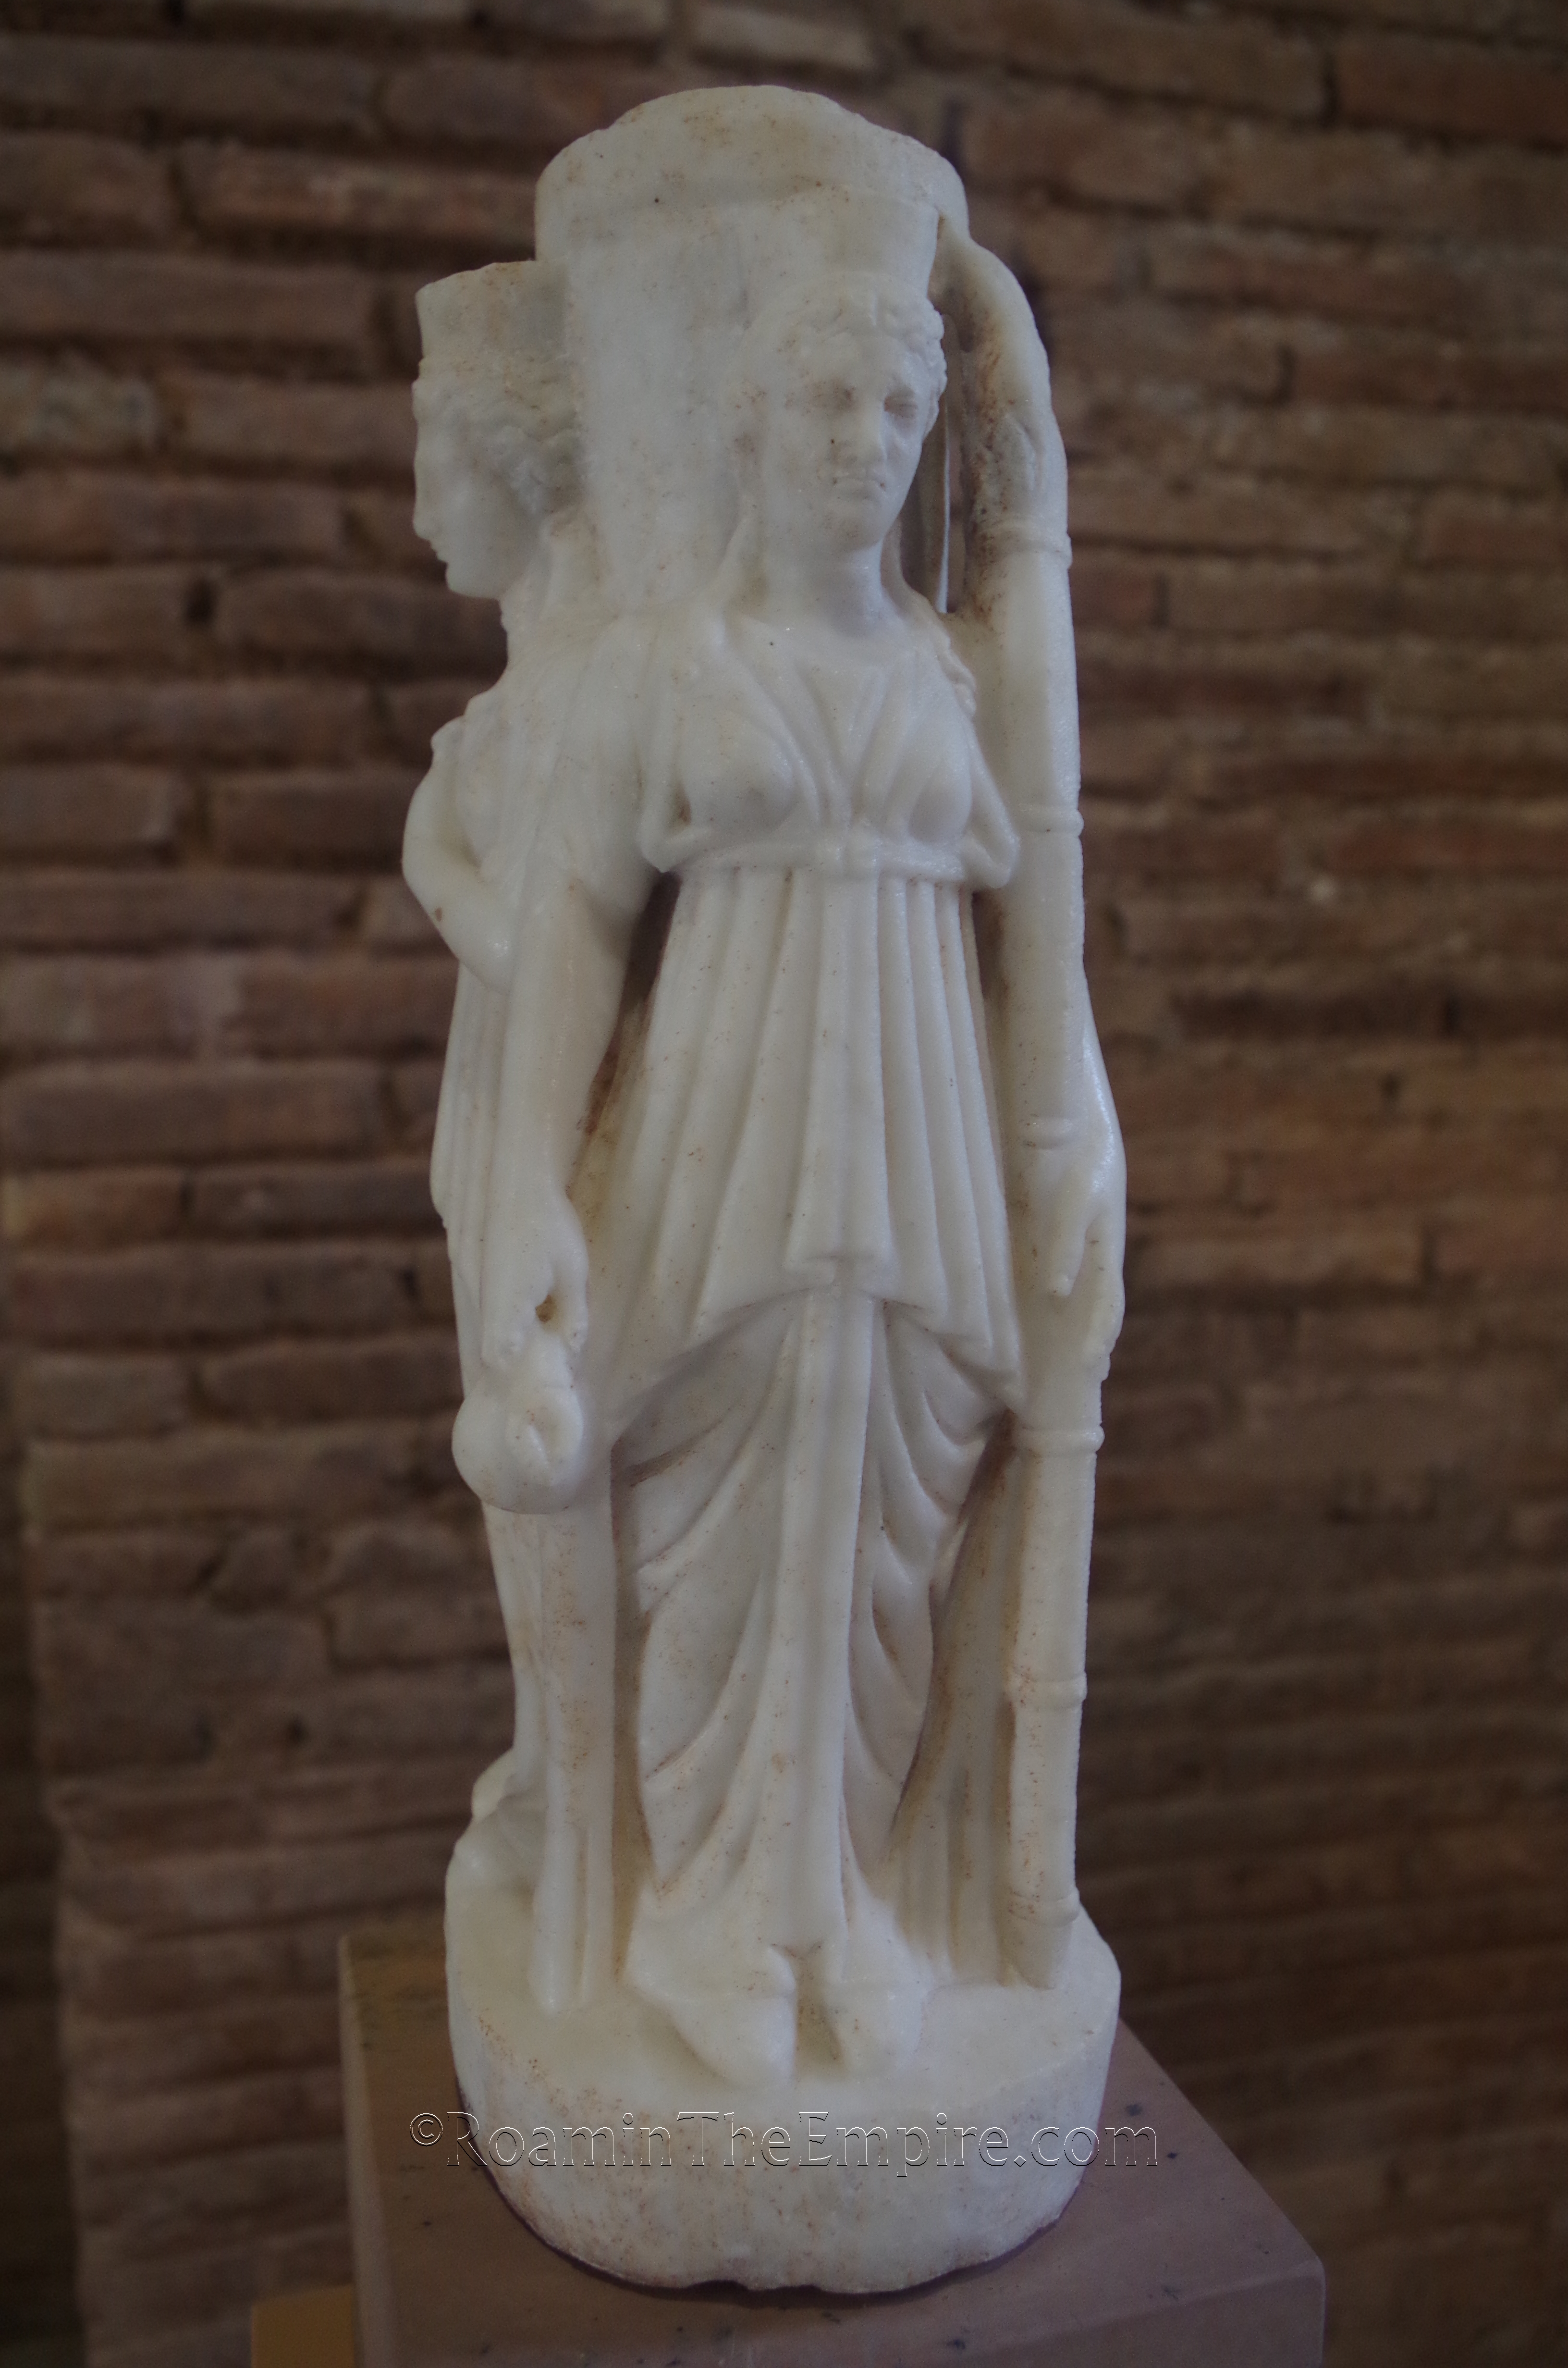 Statue of Hekate from Room II of the Roman baths. Dated to the 1st or 2nd century CE. Archaeological museum.